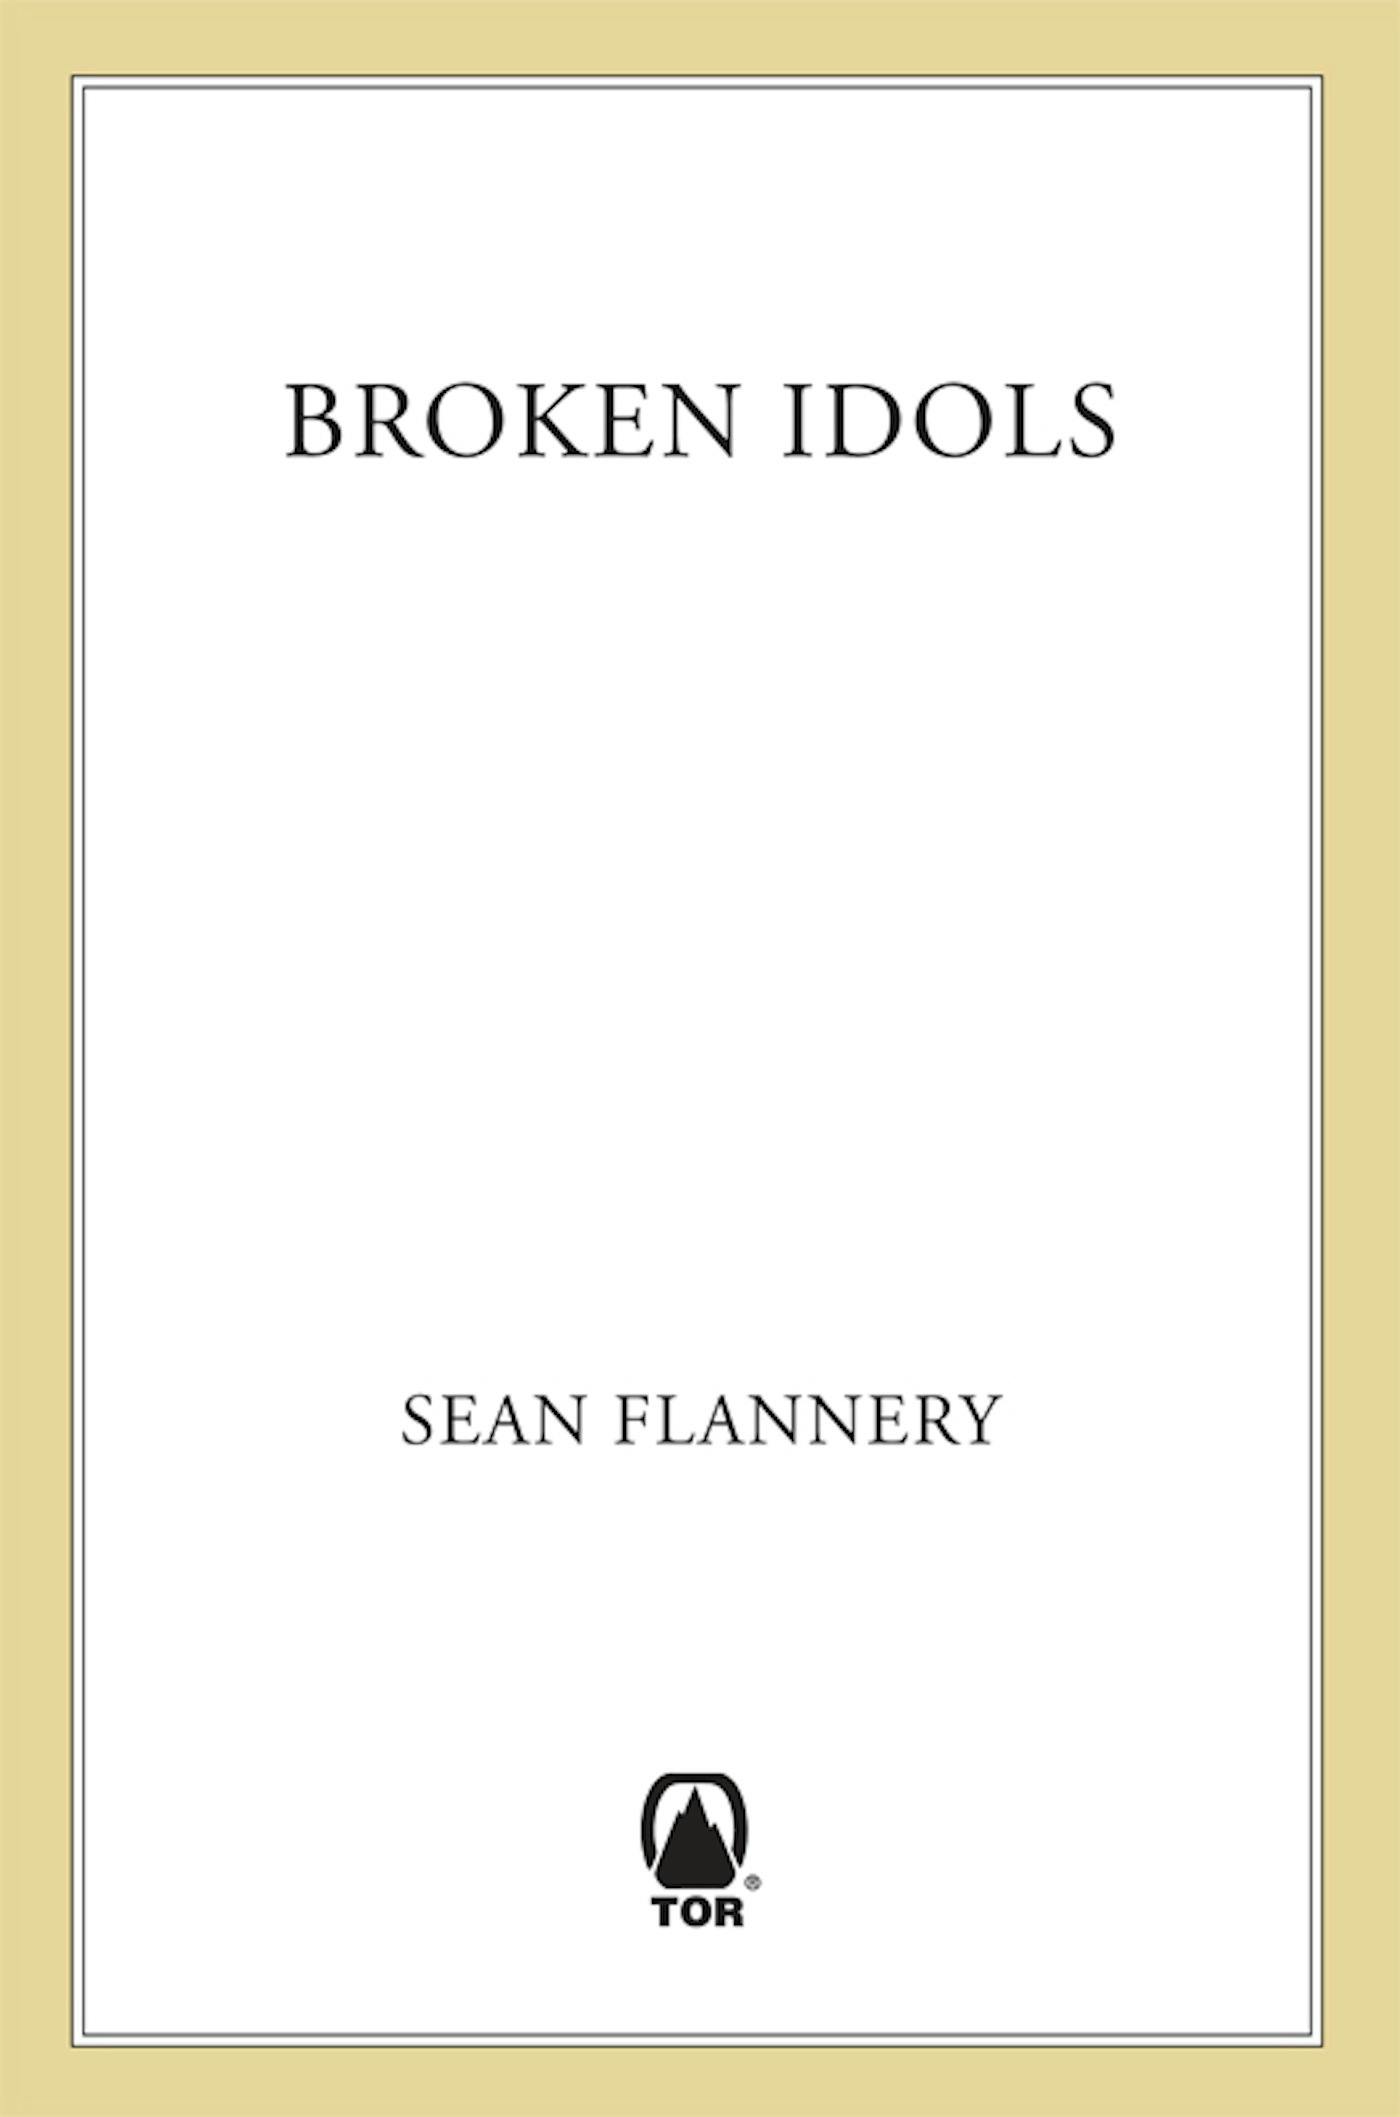 Cover for the book titled as: Broken Idols